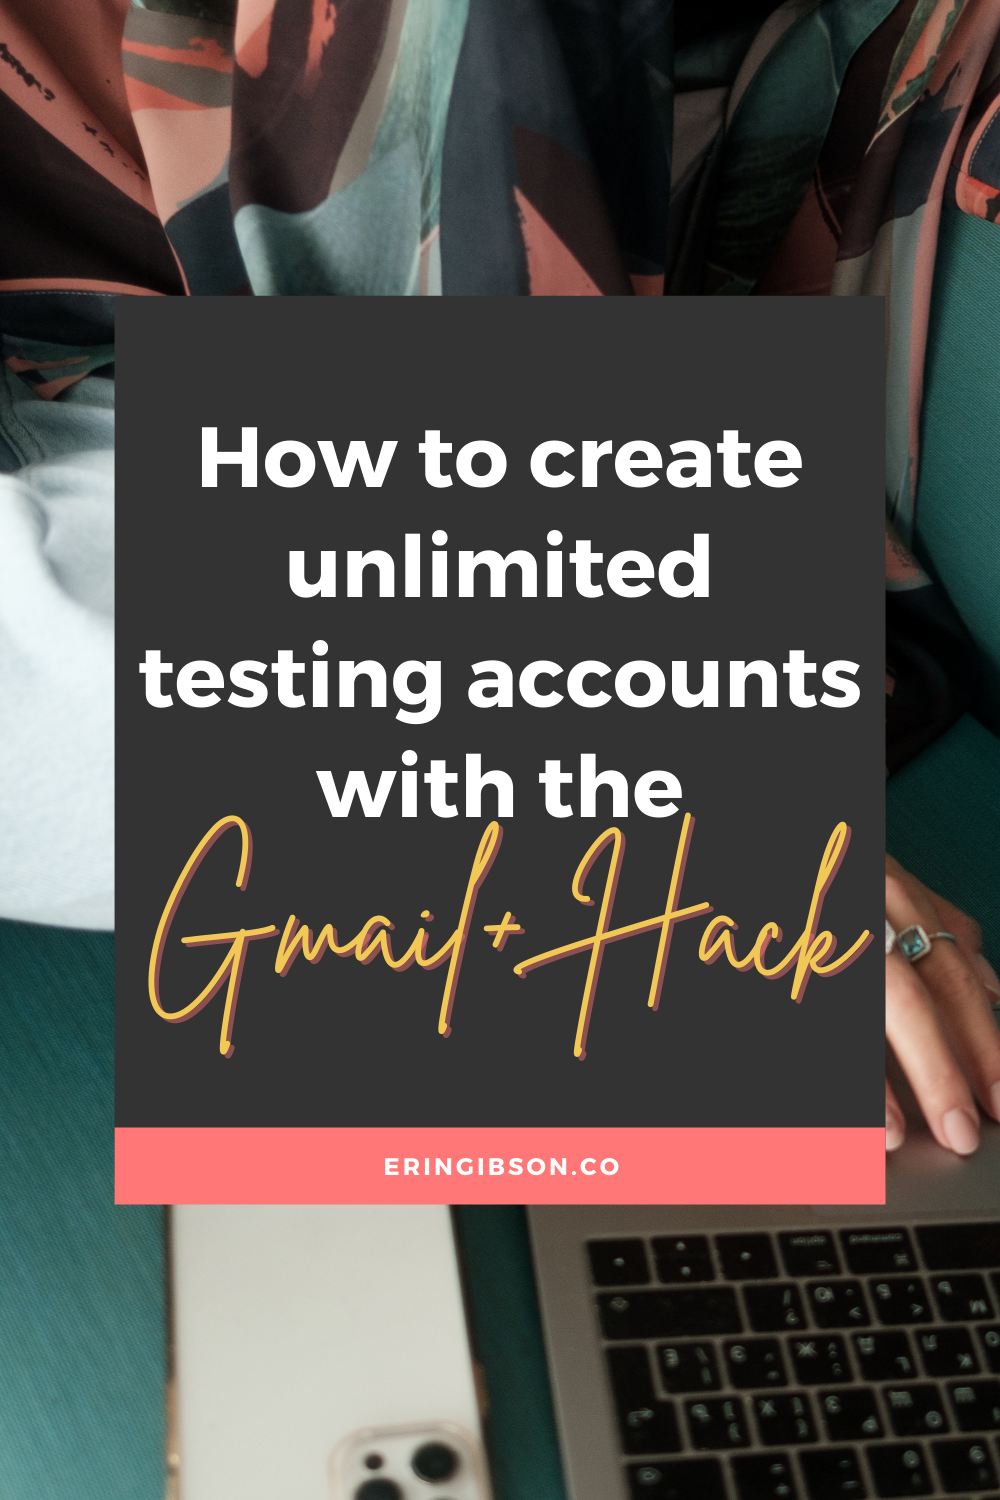 How to create unlimited email addresses with the Gmail+ hack